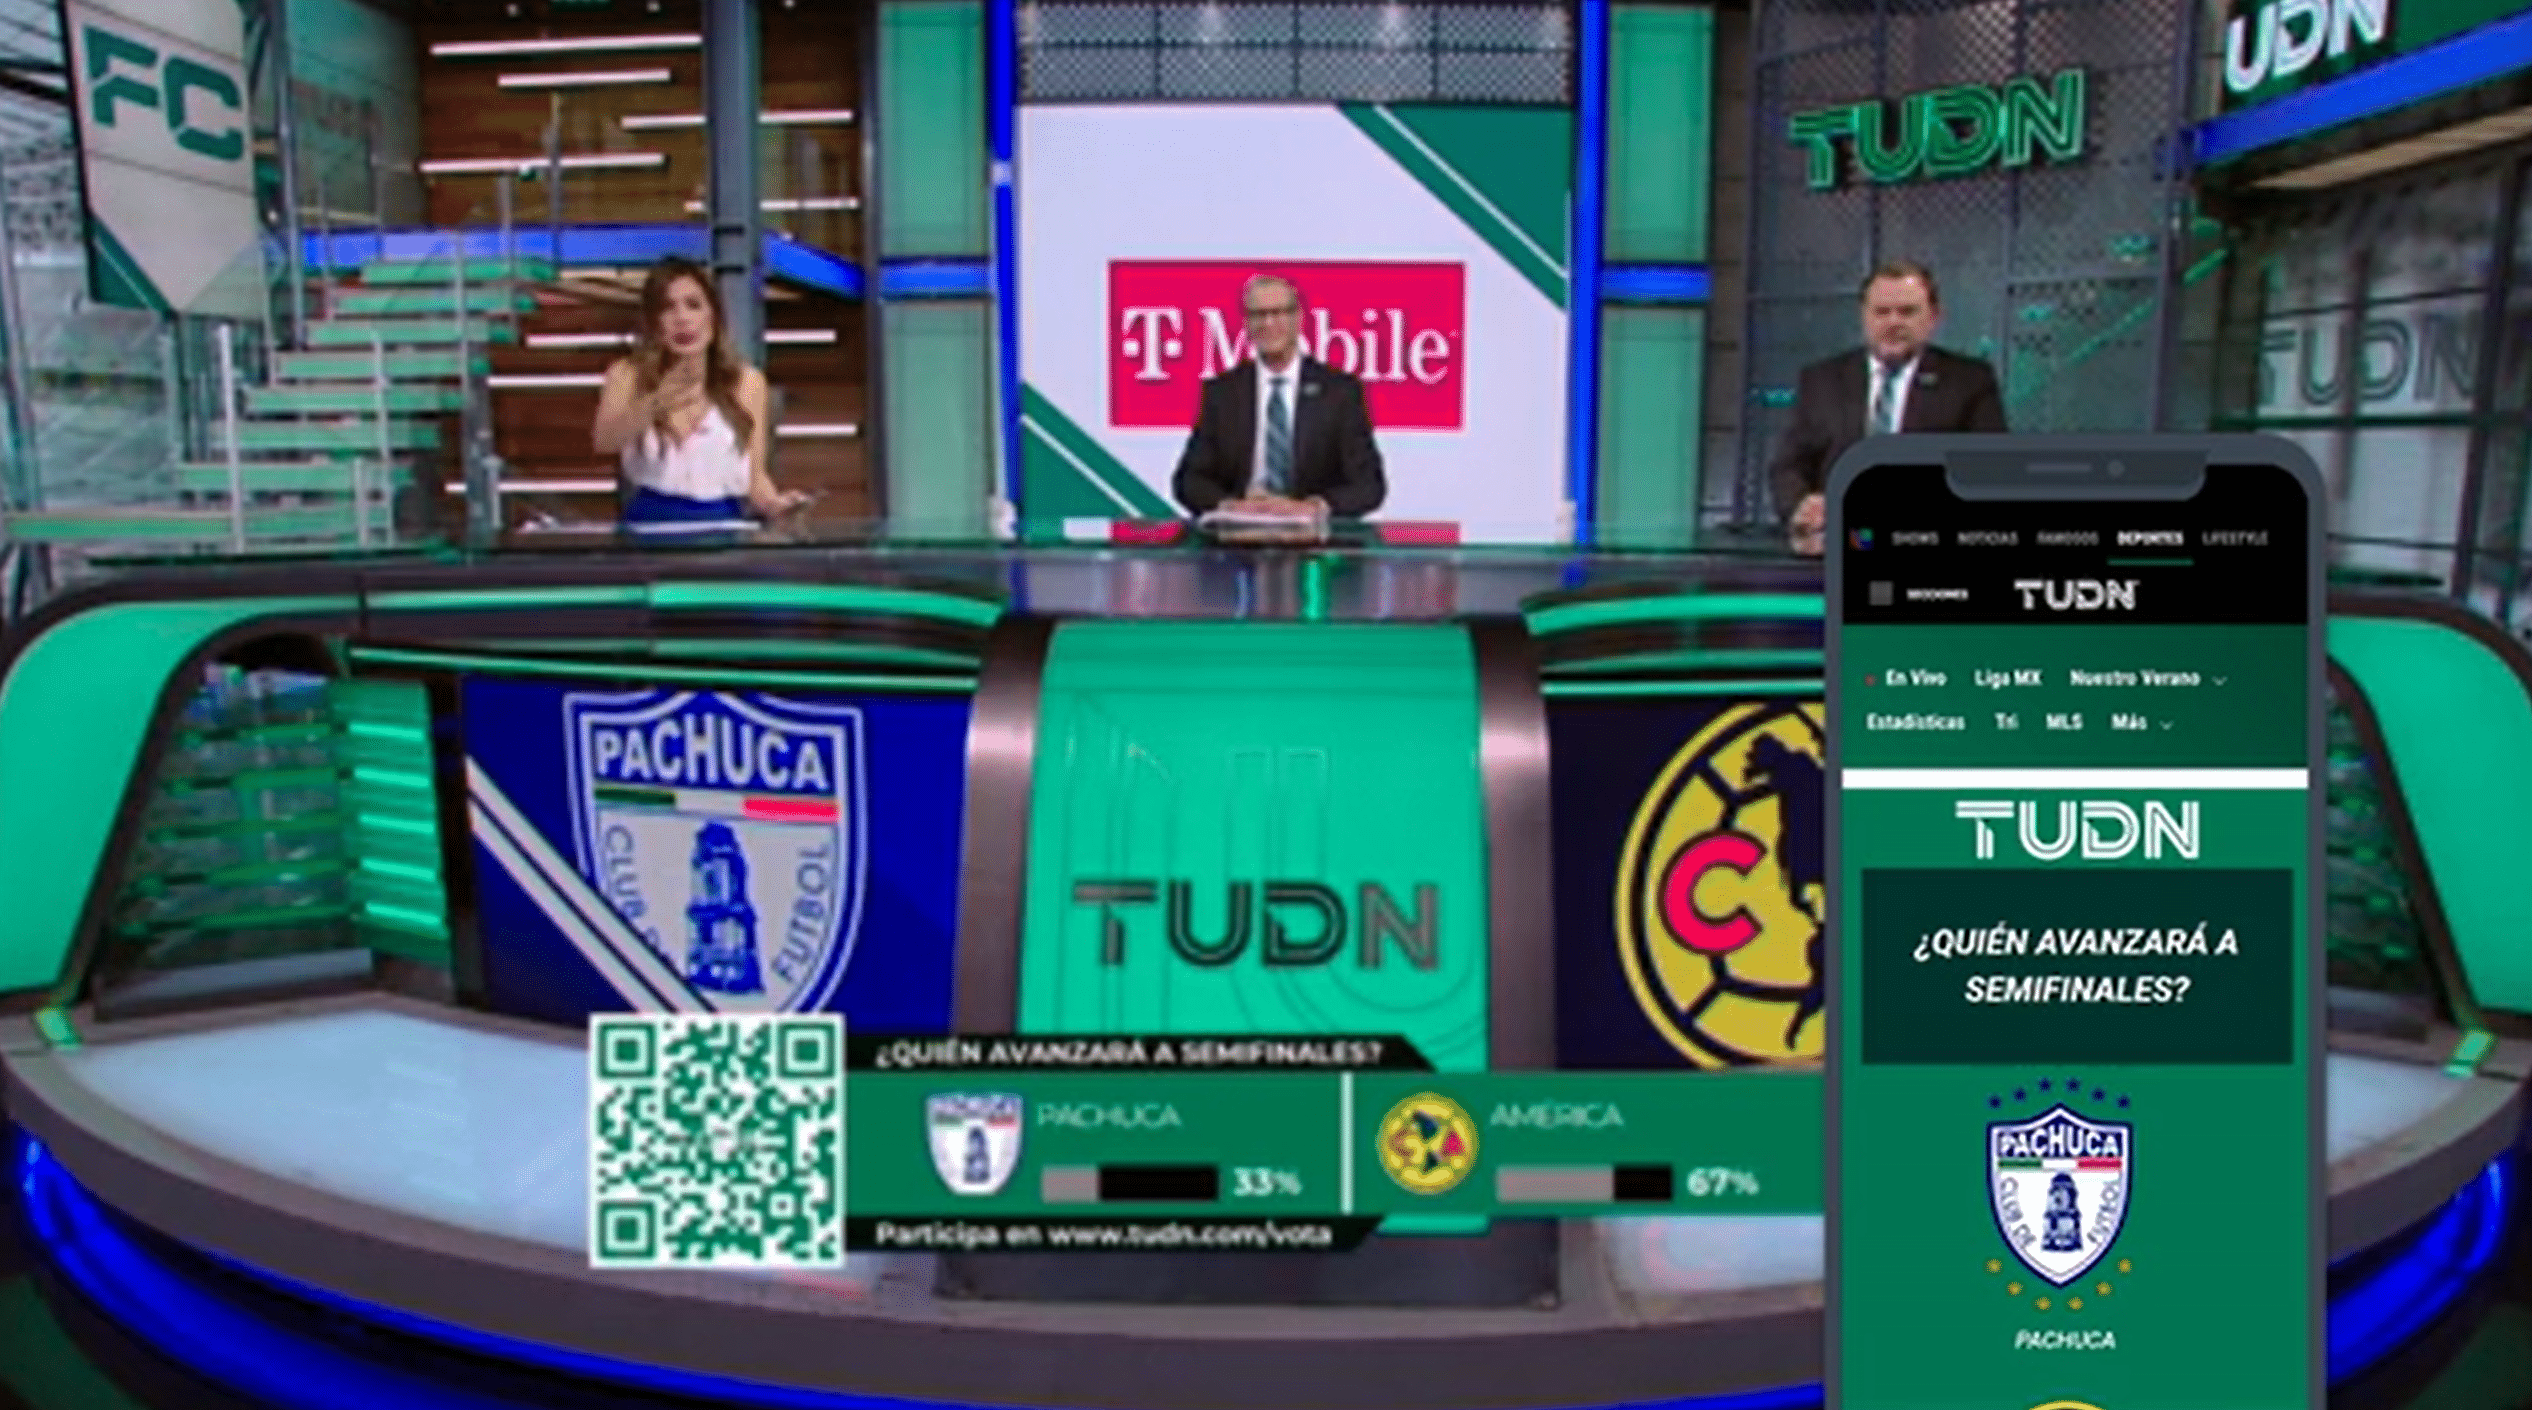 second screen with poll image overlaid on live sports broadcast TUDN